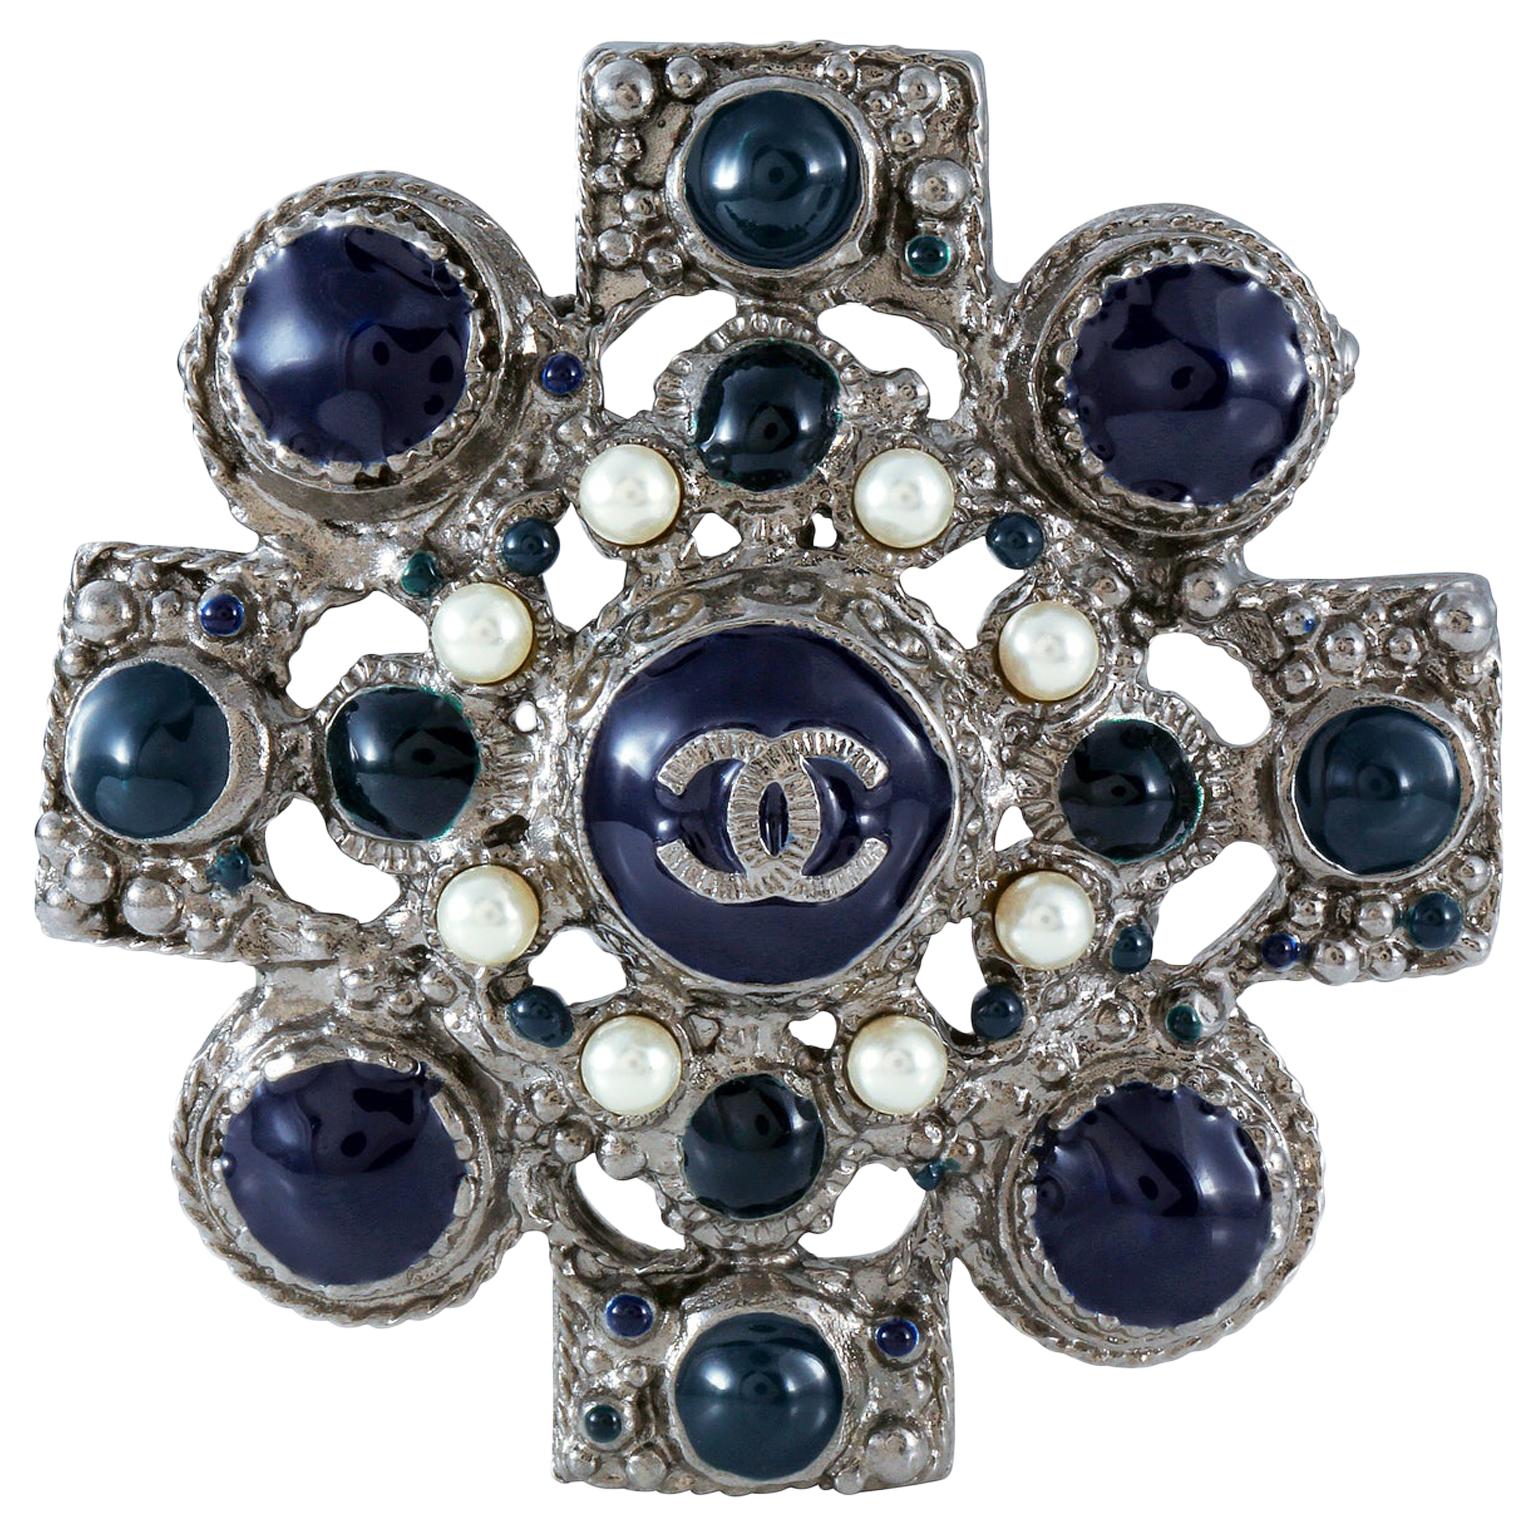 Chanel Silver and Navy Medallion Brooch Pendant